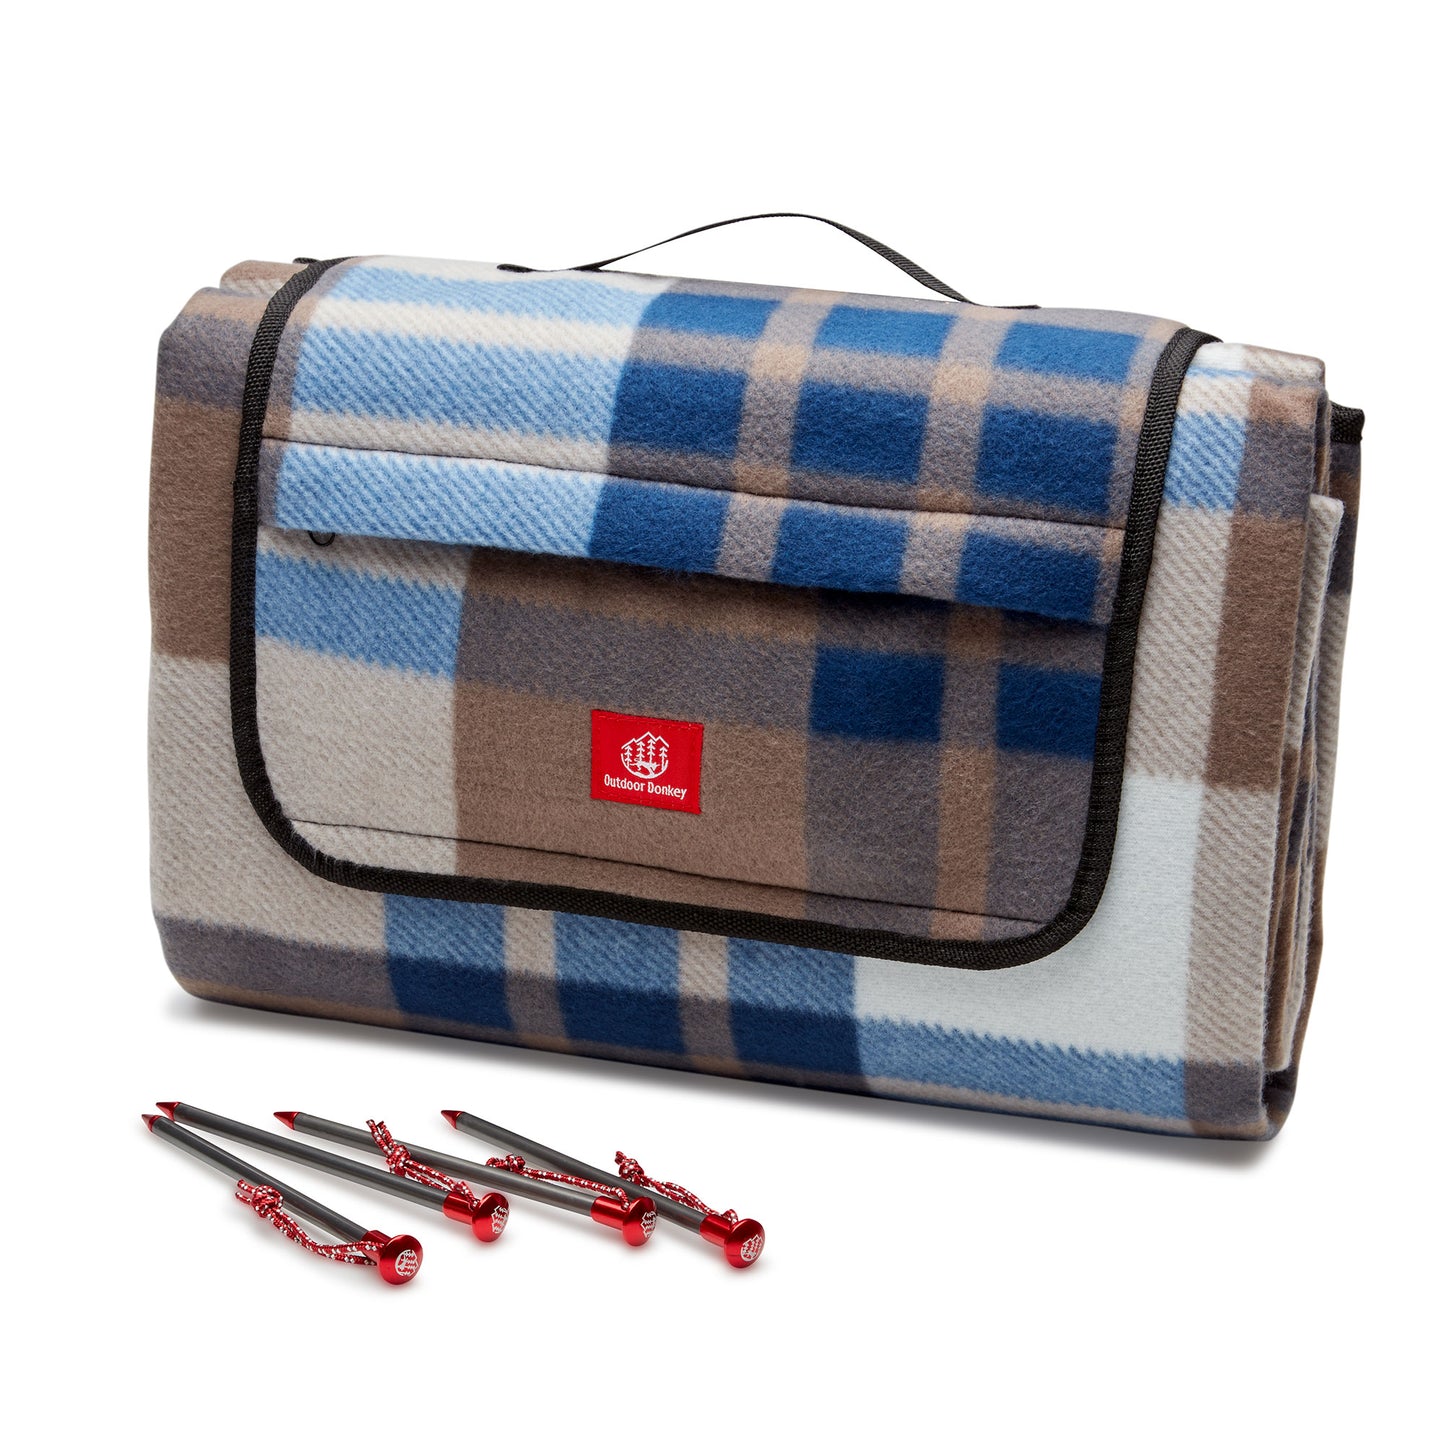 Outdoor Donkey StayPut Fleece Picnic Blanket with stakes